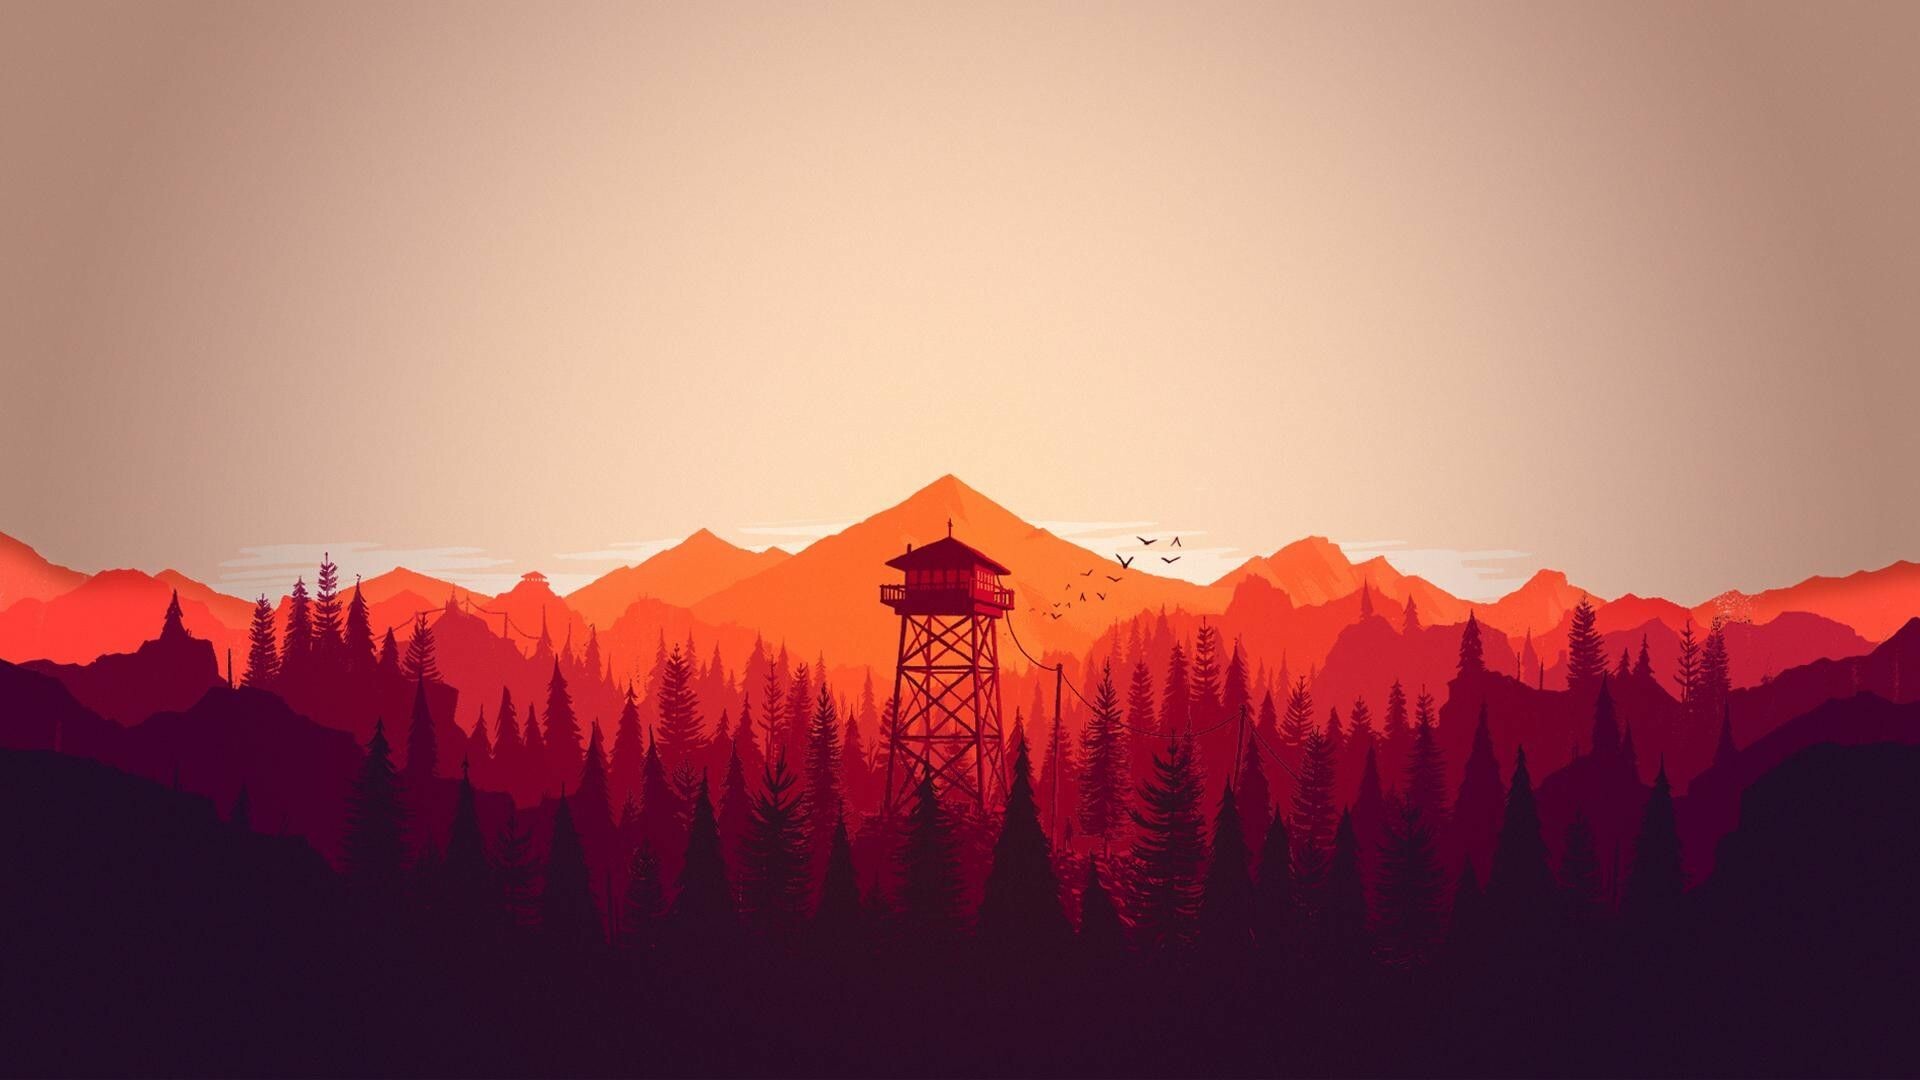 Red Dual Screen Wallpapers